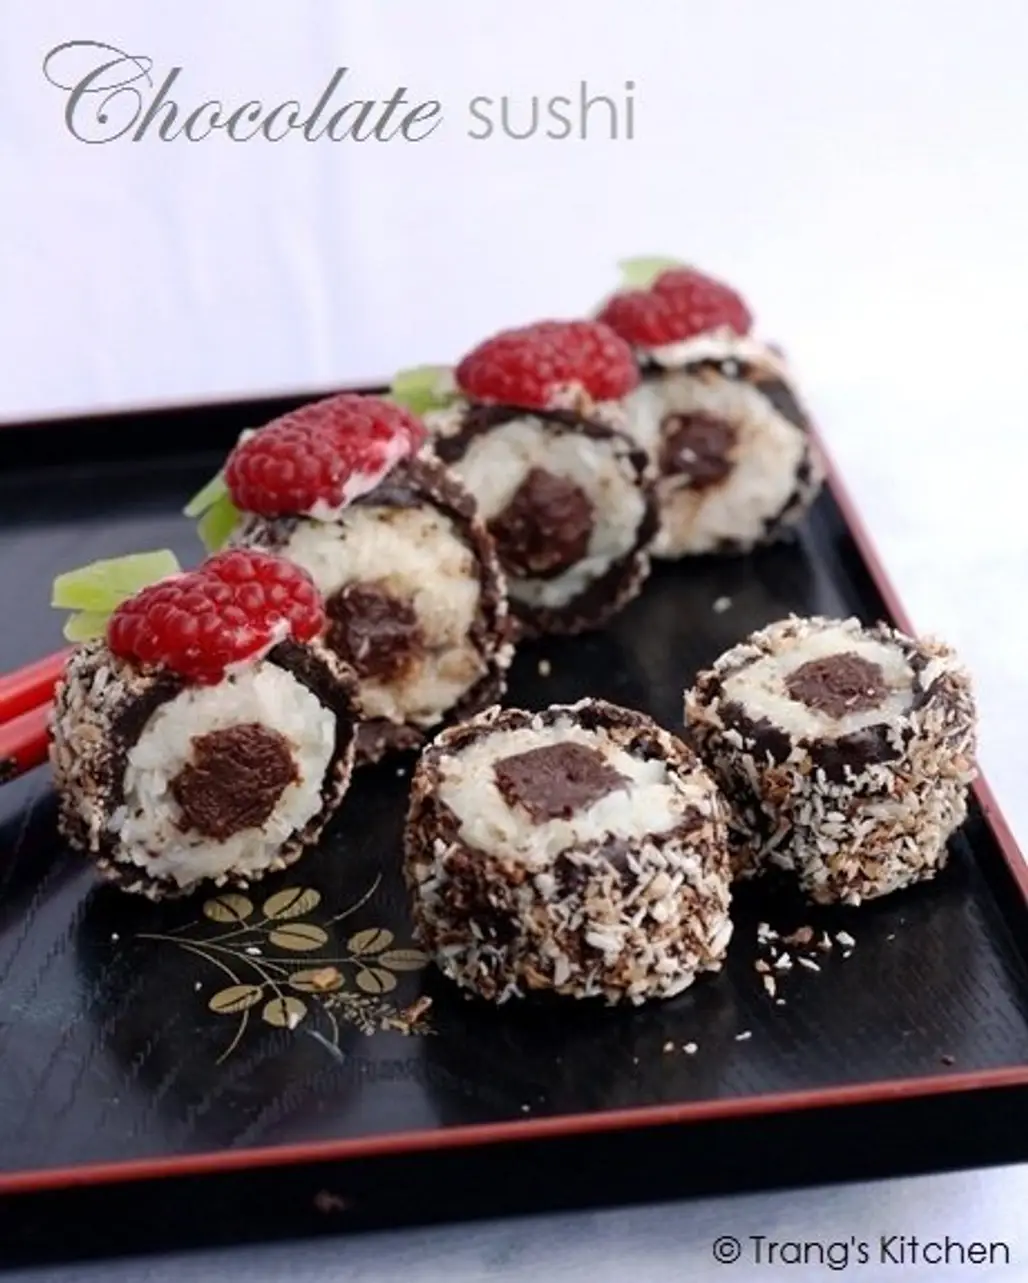 Chocolate, Coconut and Fruit Sushi